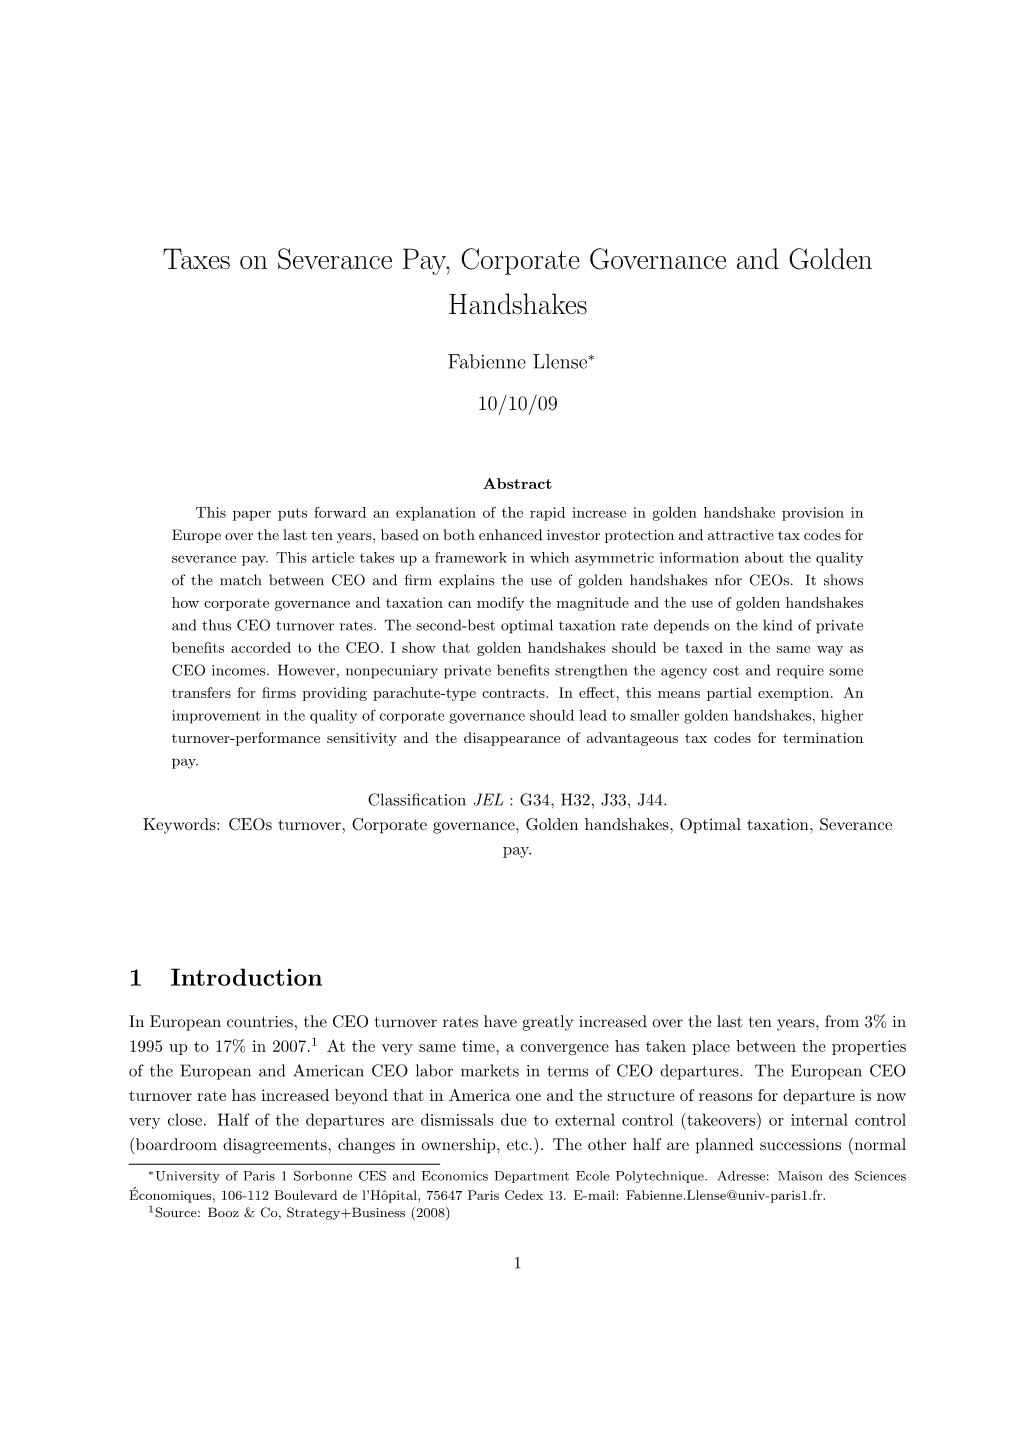 Taxes on Severance Pay, Corporate Governance and Golden Handshakes